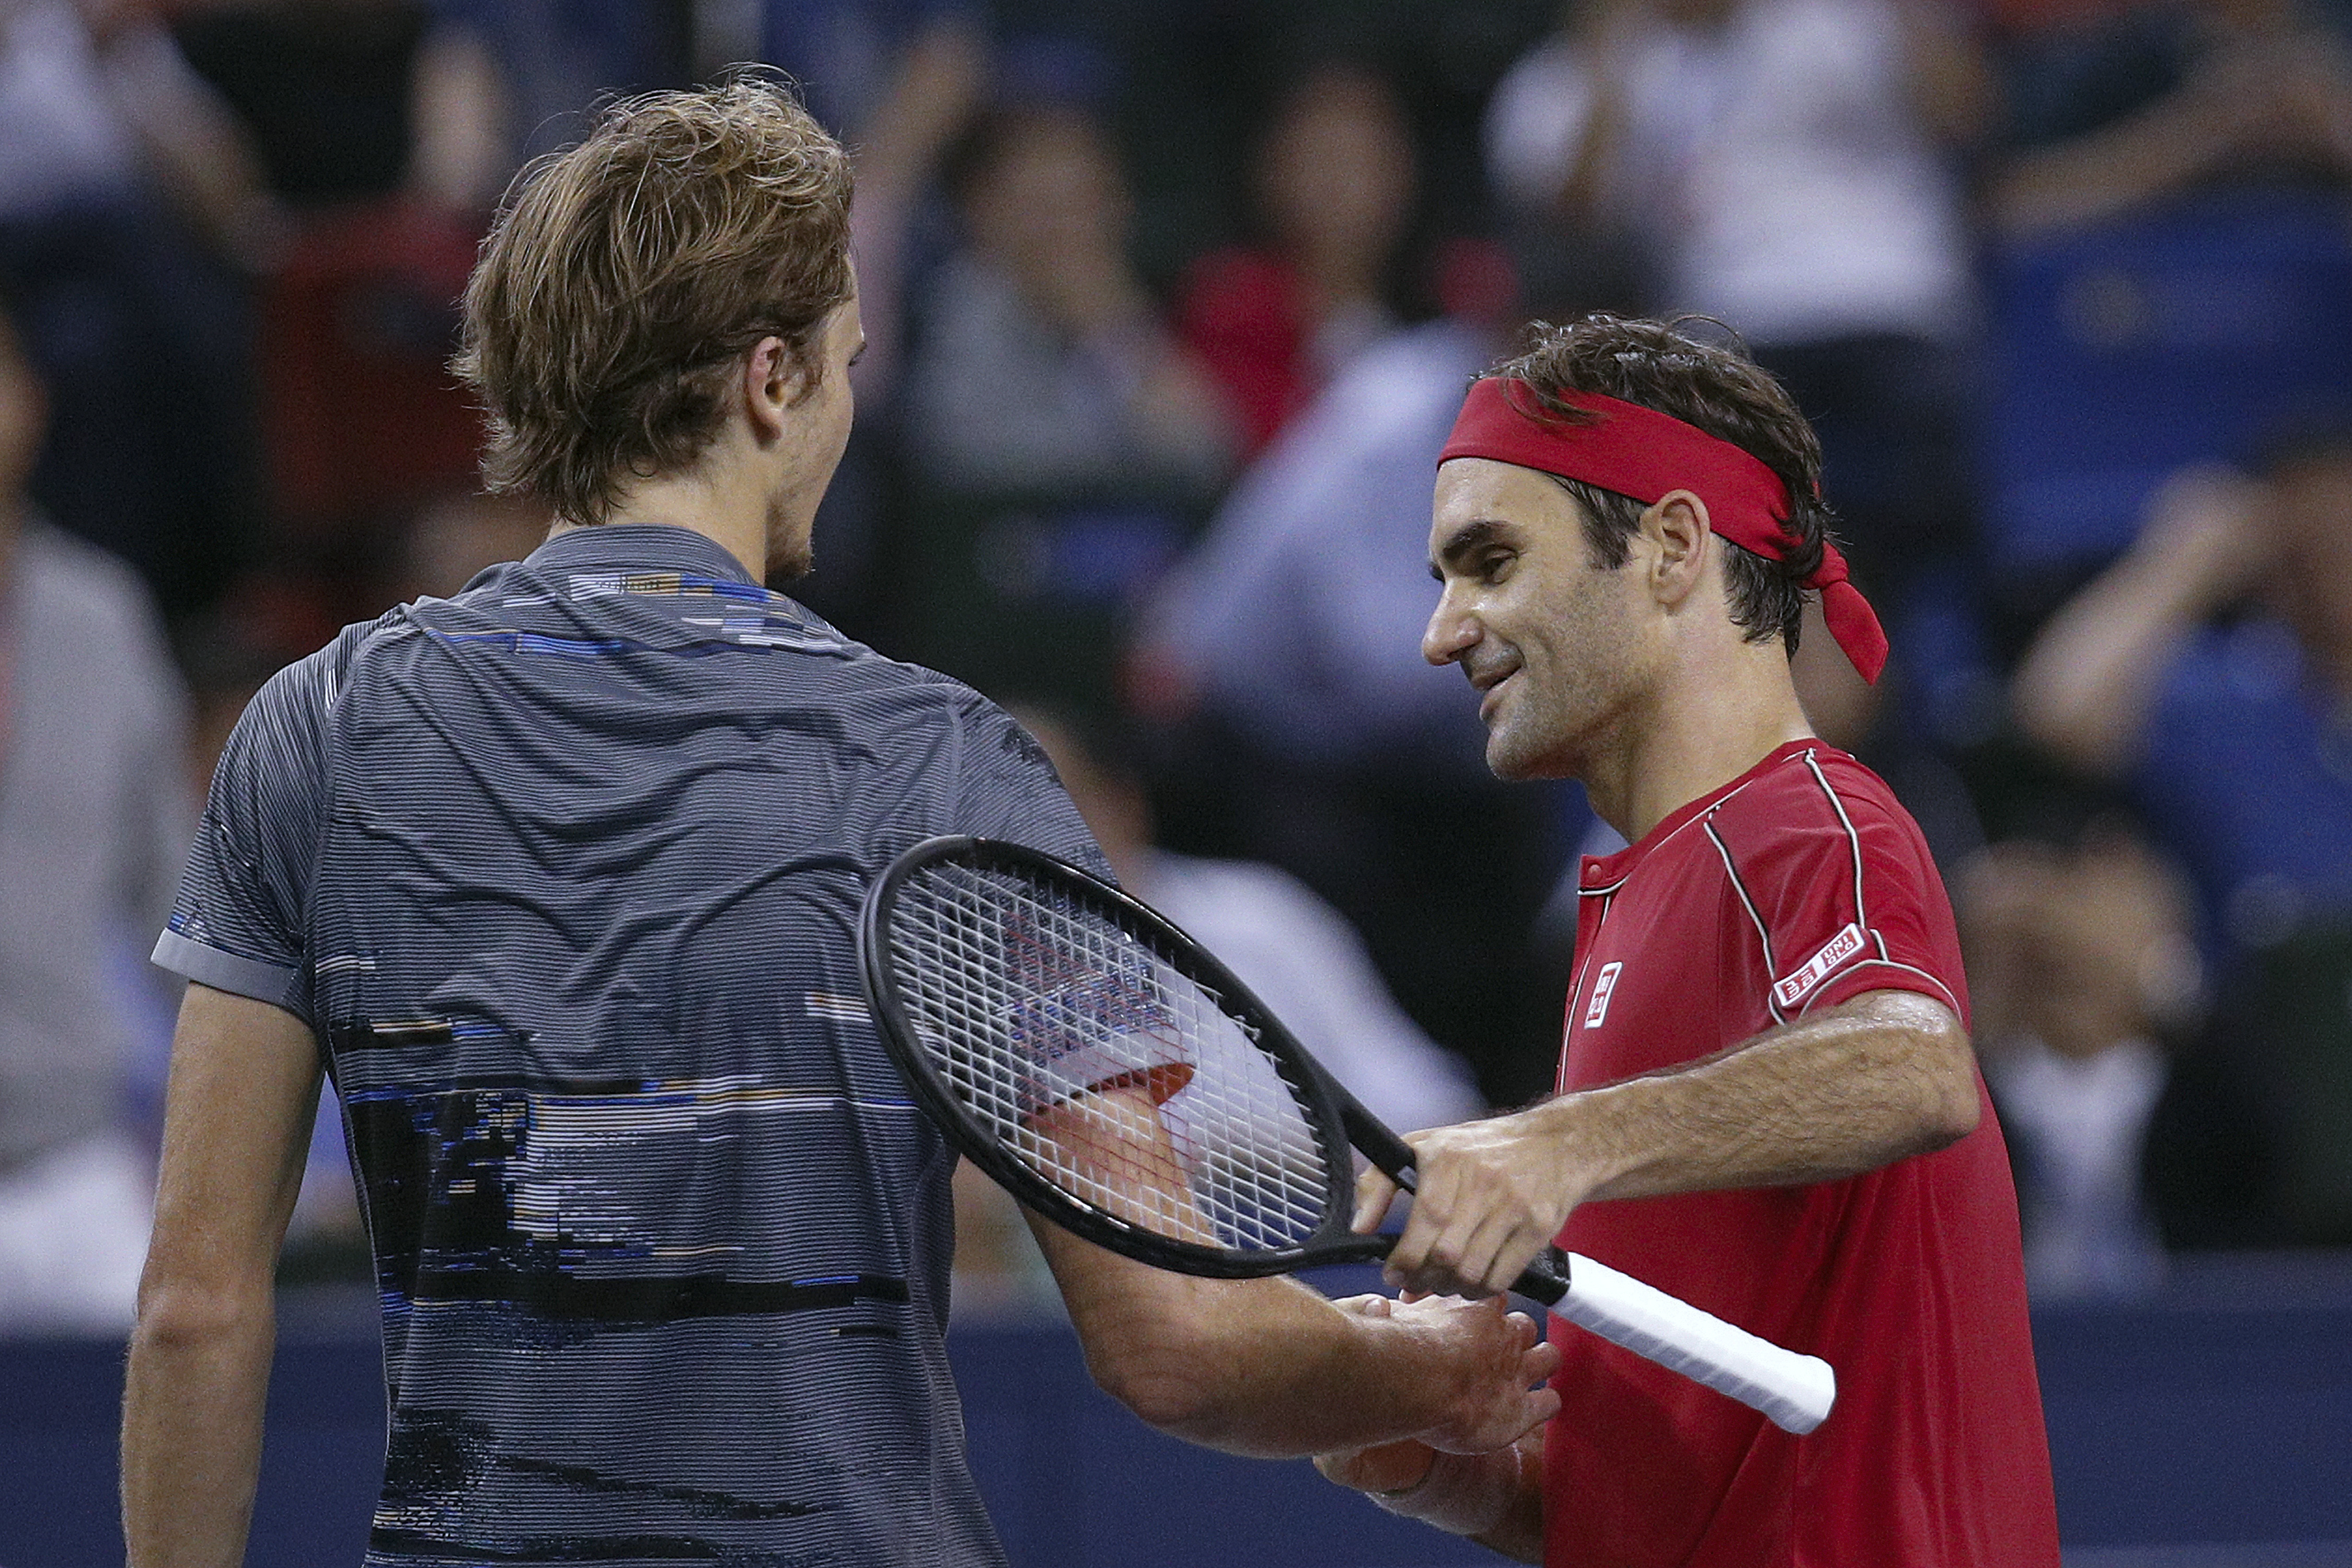 Alexander Zverev of Germany is greeted by Roger Federer of Switzerland after winning in the men's singles quarterfinals match at the Shanghai Masters tennis tournament at Qizhong Forest Sports City Tennis Center in Shanghai, China, Friday, Oct. 11, 2019. (AP Photo/Andy Wong)